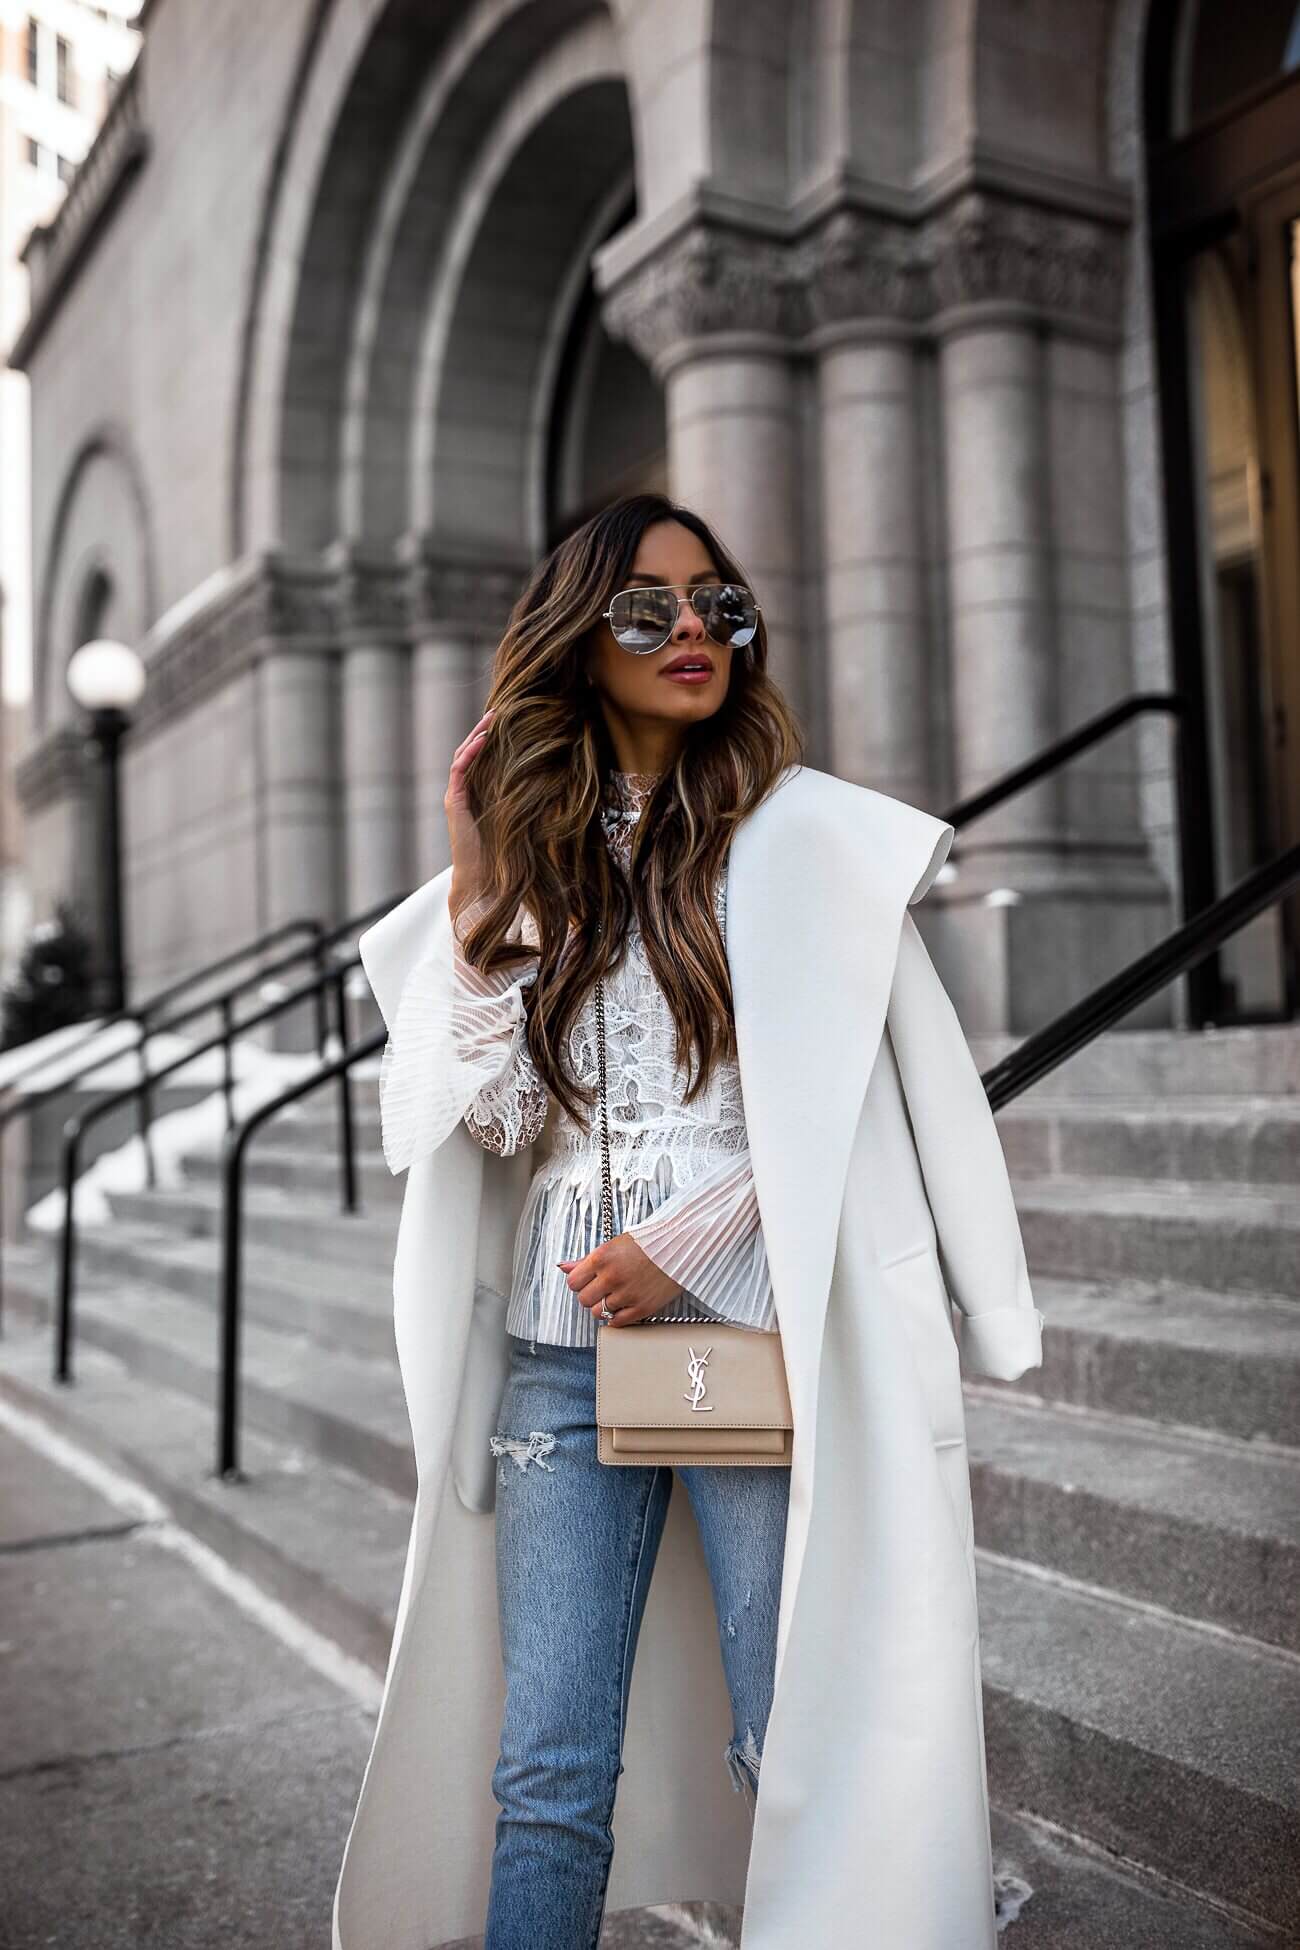 fashion blogger mia mia mine wearing a white coat from pretty little thing and a white lace top for spring 2019